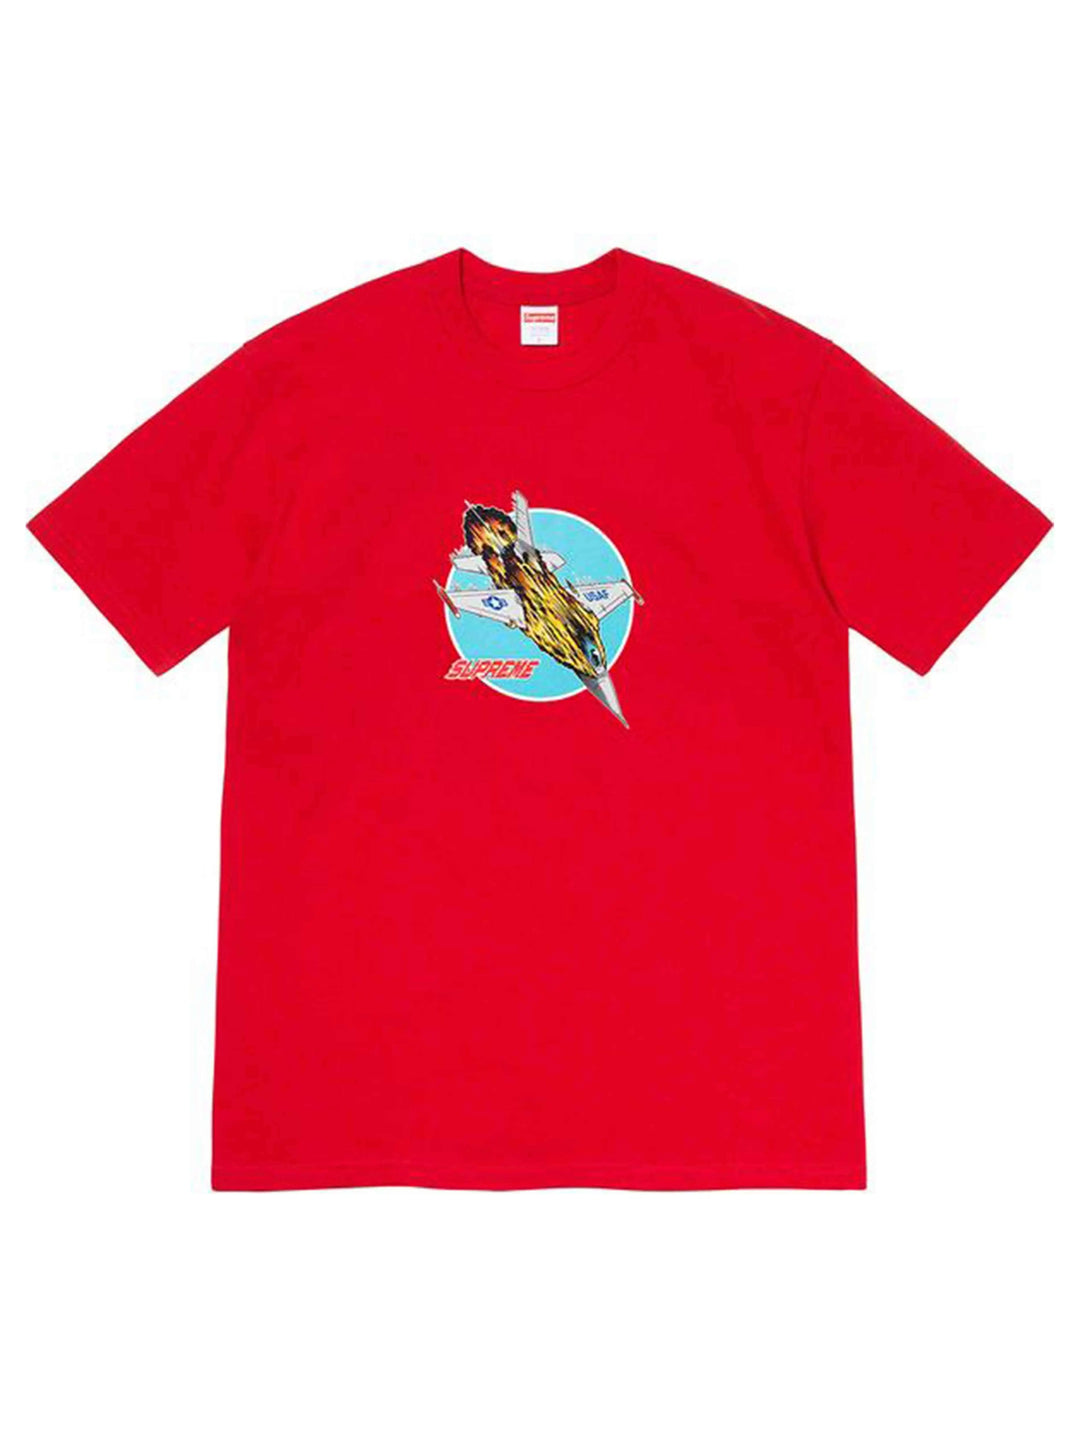 Supreme Jet Tee Red [FW20] Prior